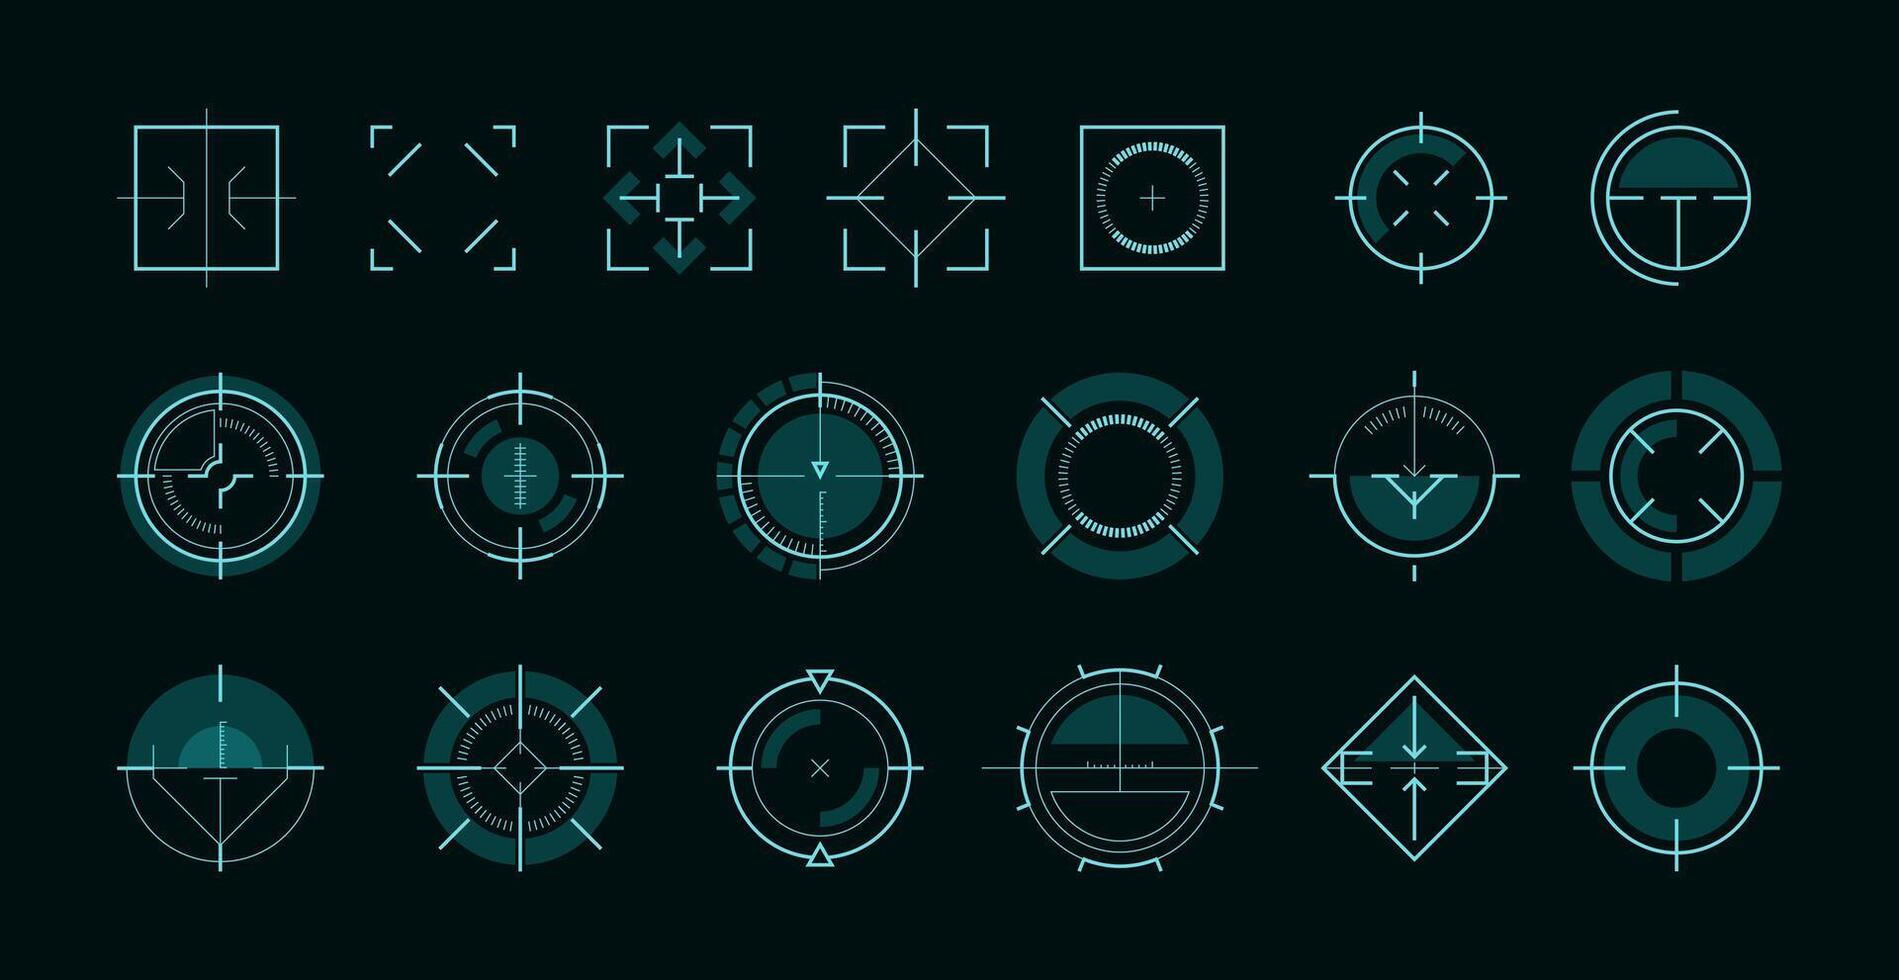 HUD aim ui. Futuristic circle target frame for game user interface, military sniper weapon sight hologram, sci-fi focus vector